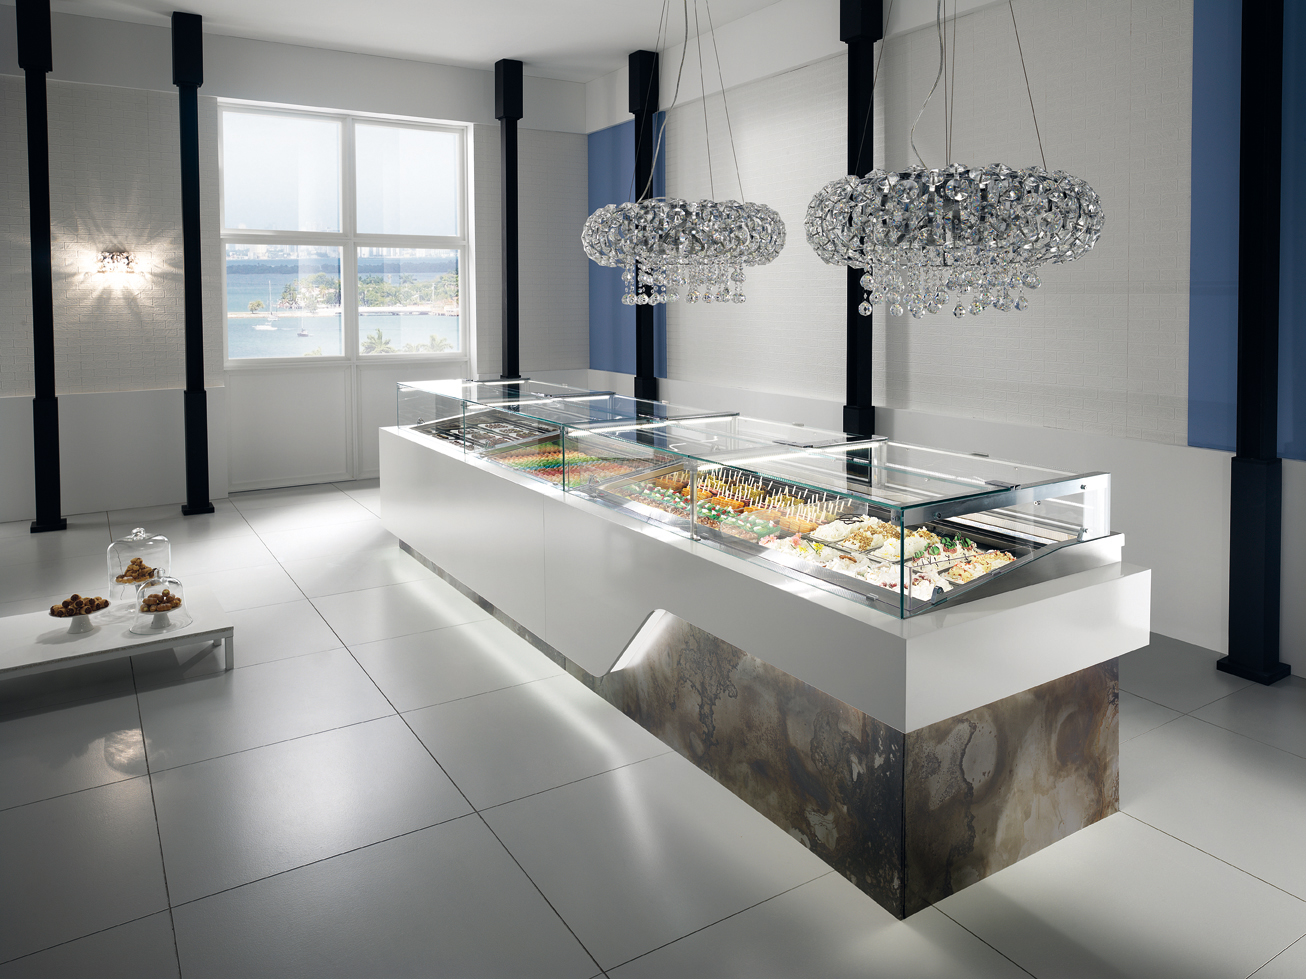 Unique Catering Products exclusive importer of CIAM refrigeration display units